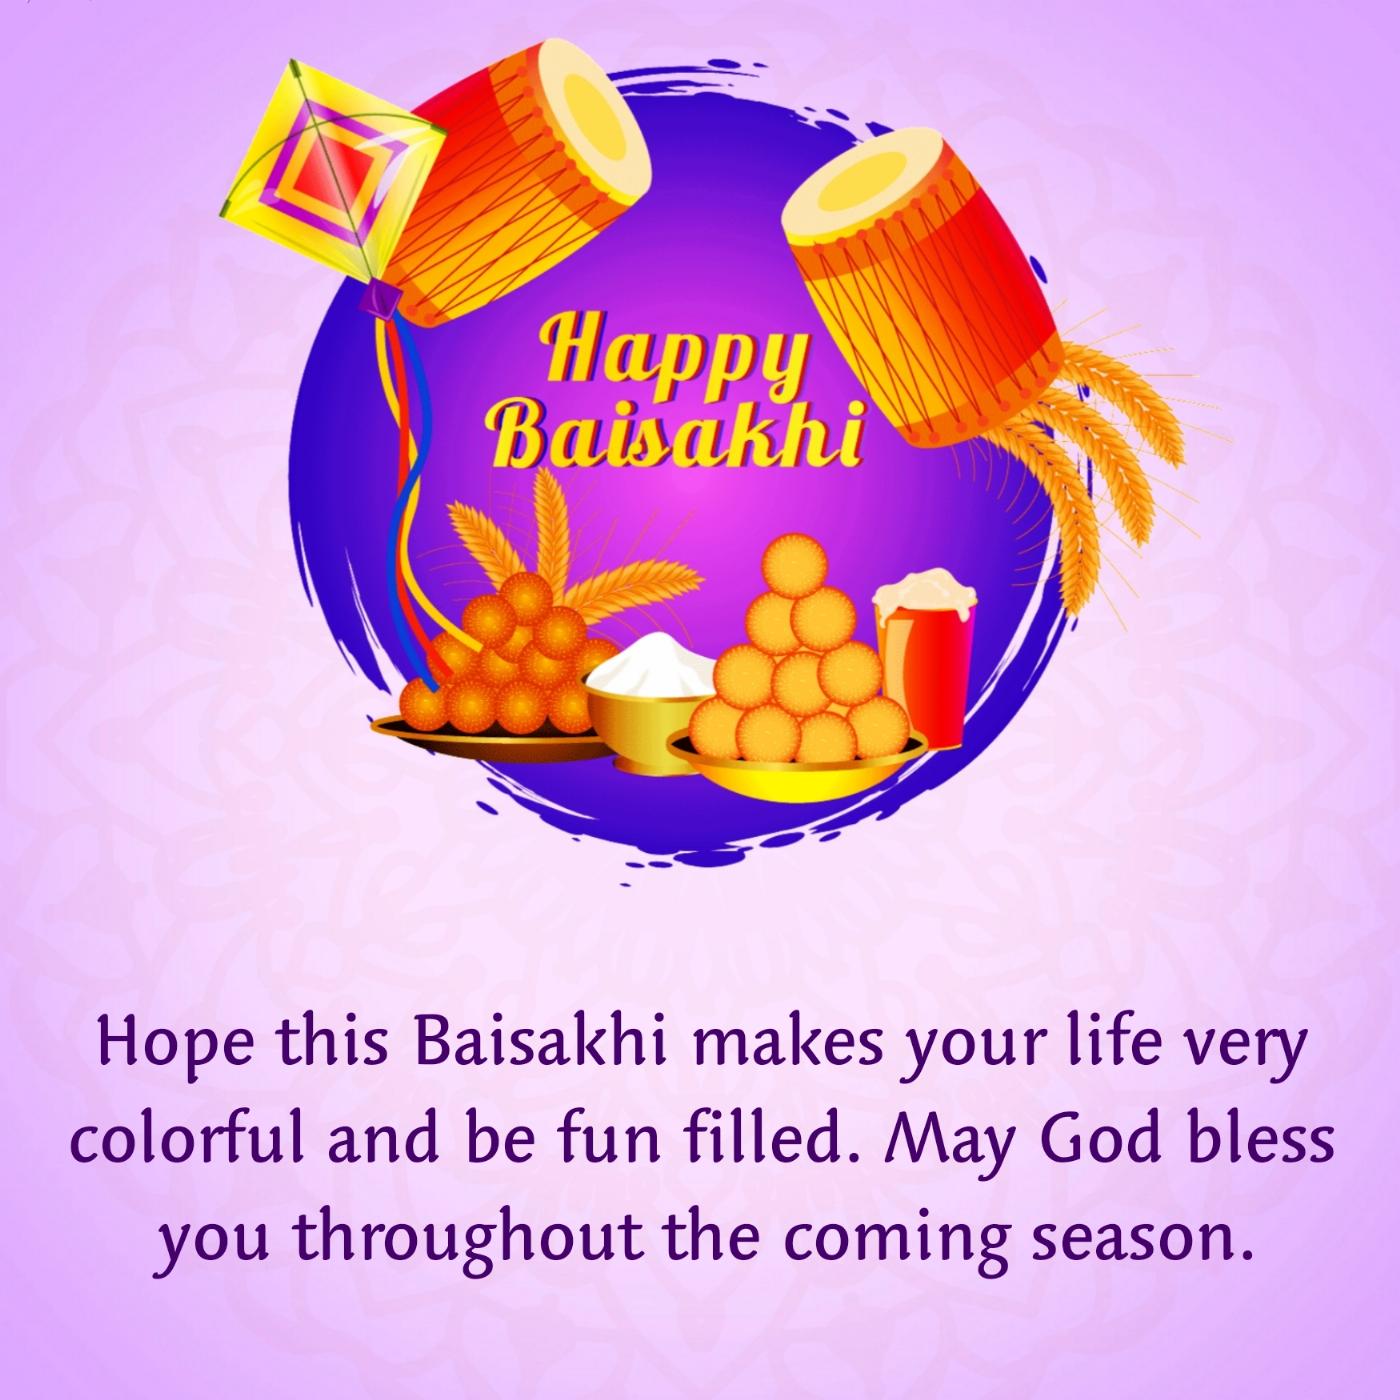 Hope this Baisakhi makes your life very colorful and be fun filled